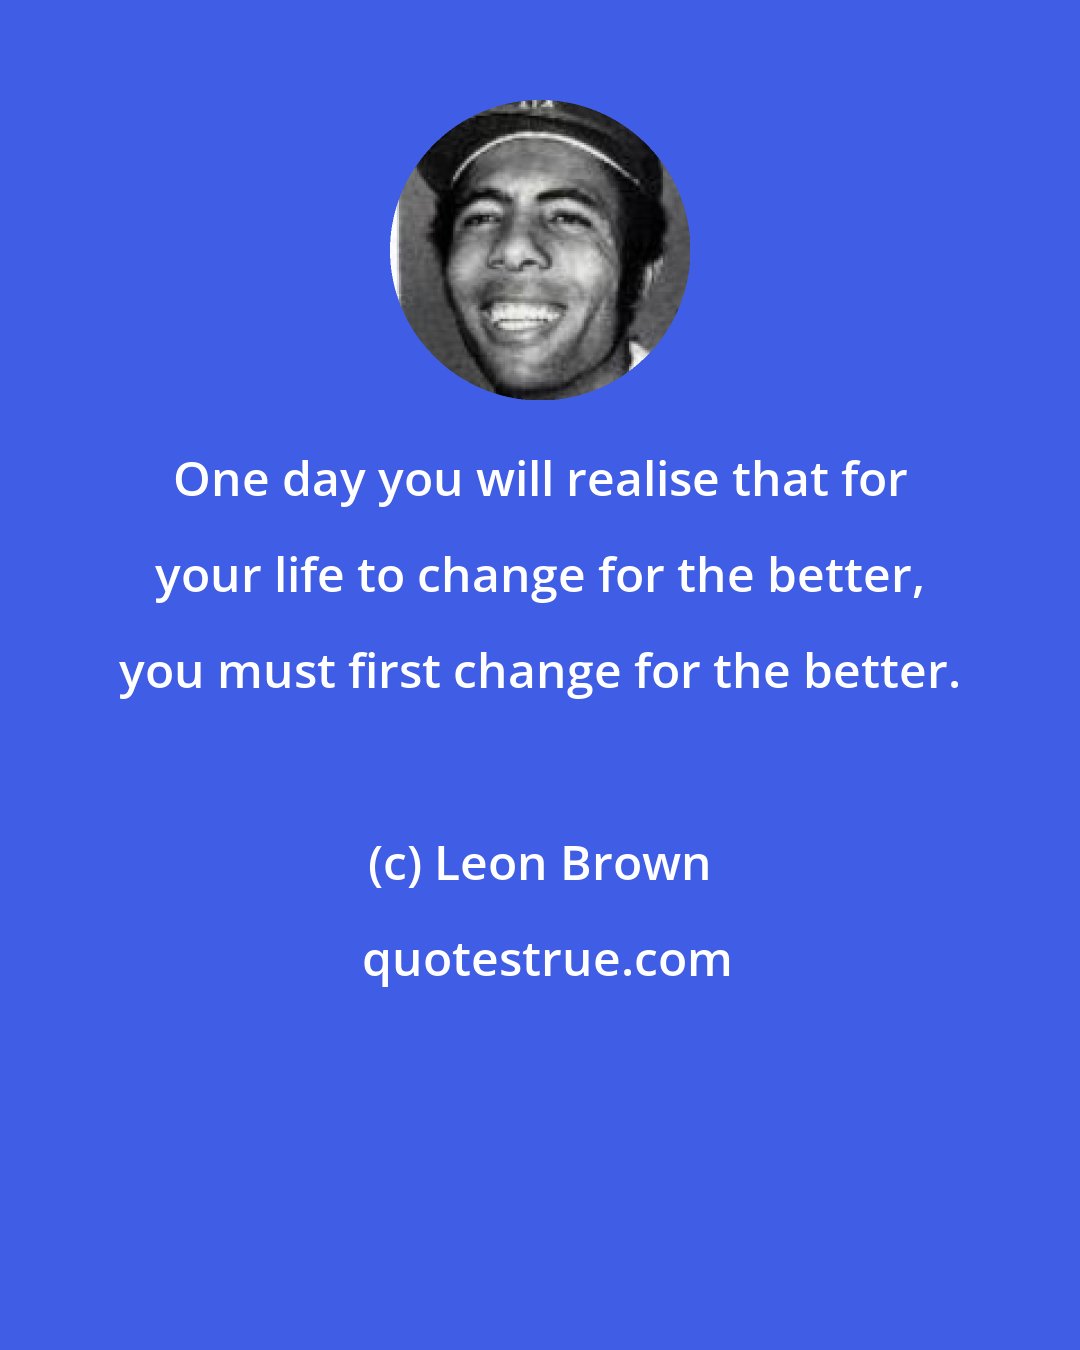 Leon Brown: One day you will realise that for your life to change for the better, you must first change for the better.